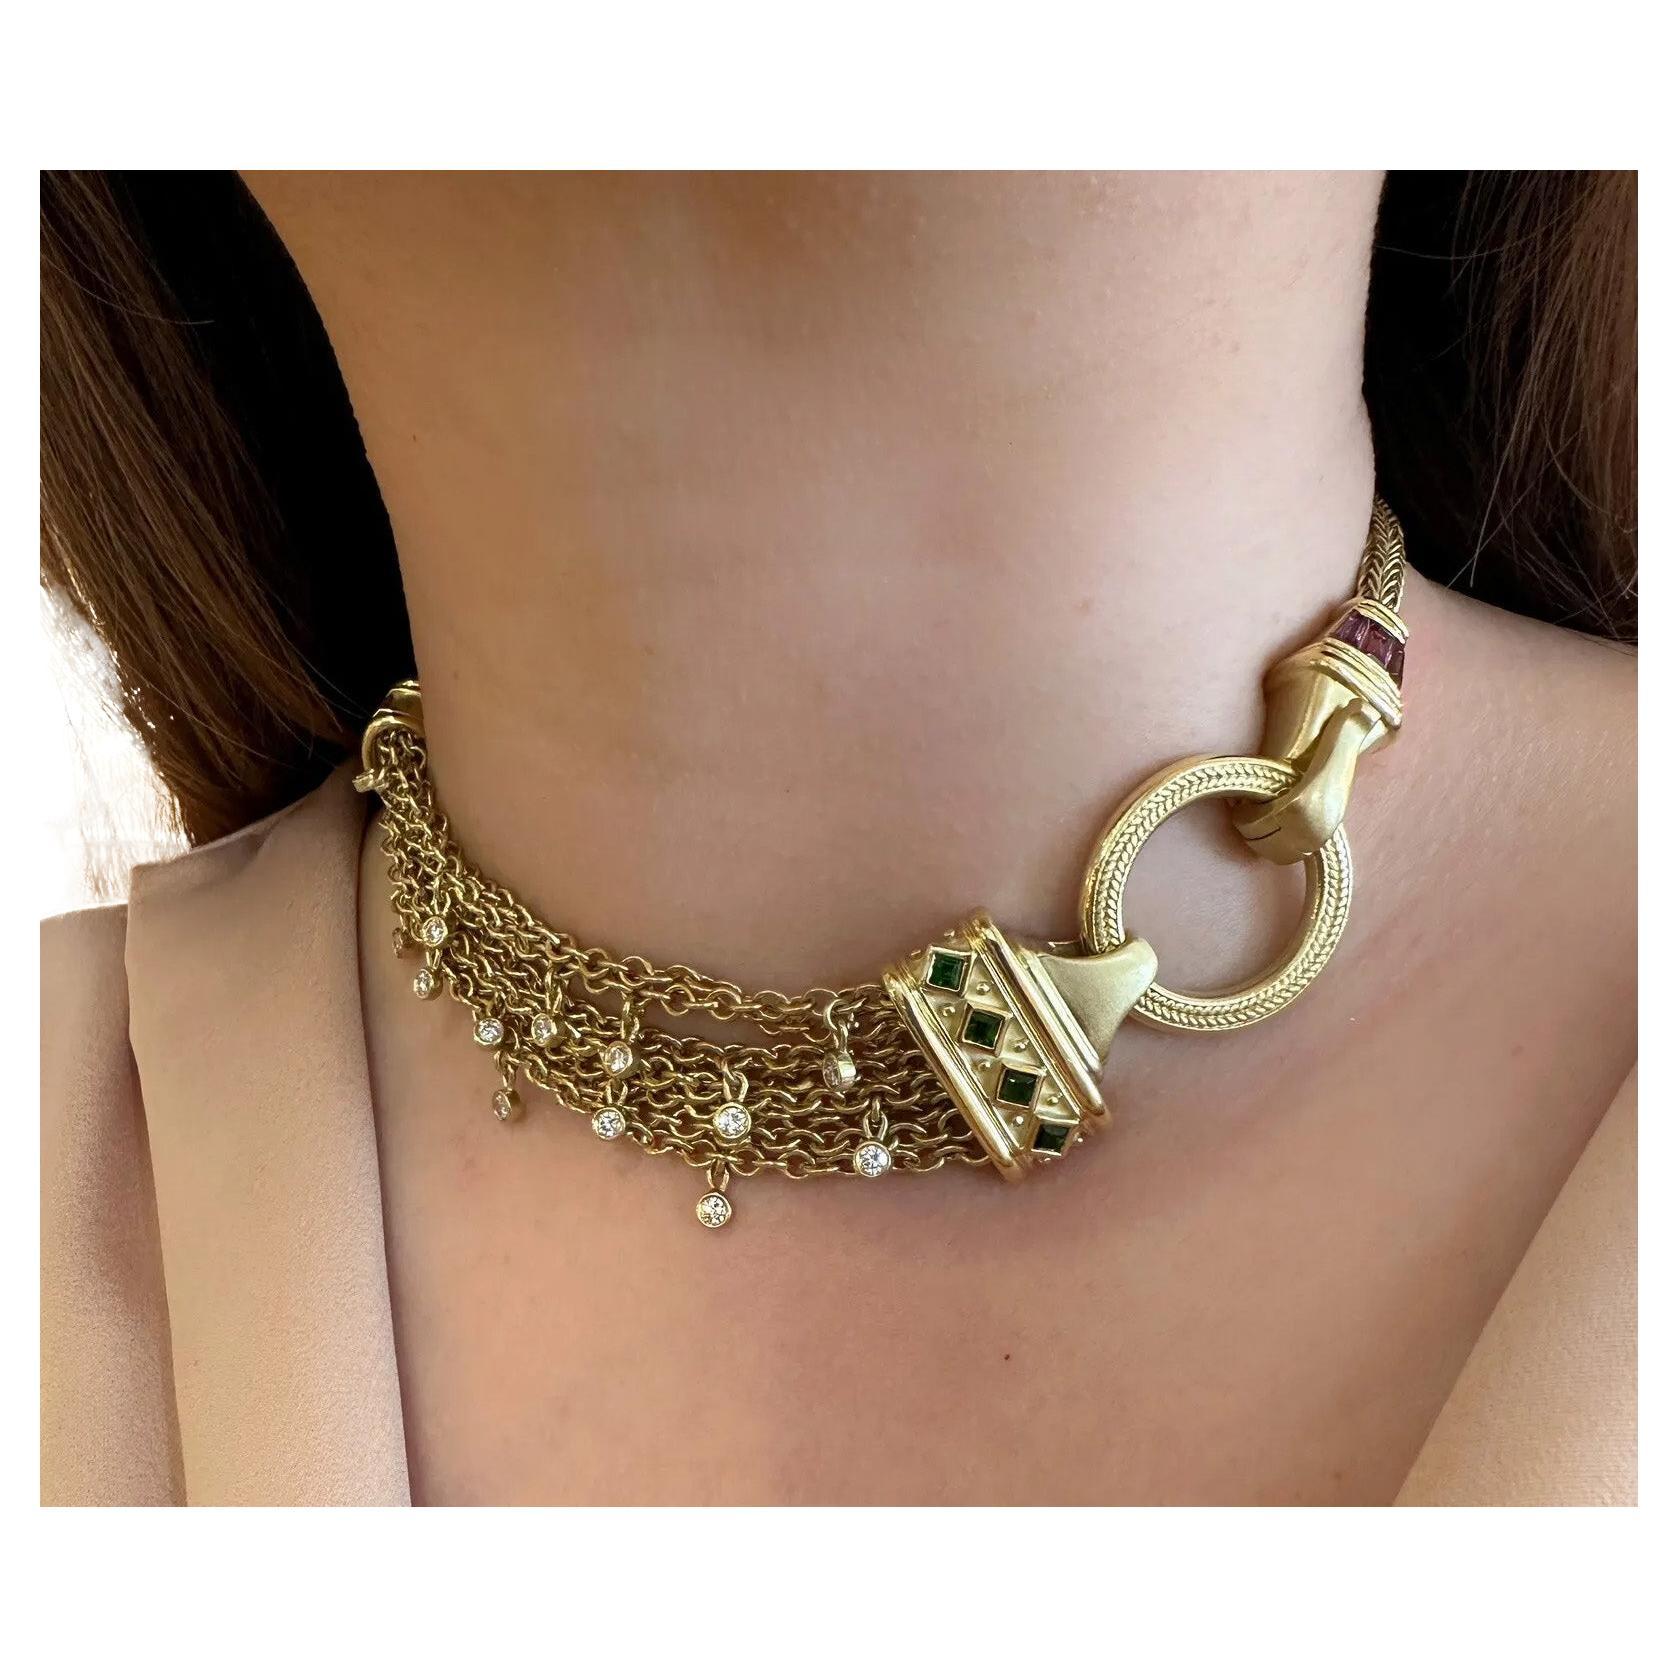 SeidenGang Choker Necklace with Diamonds and Tourmalines in 18k Yellow Gold

Multistrand Choker Necklace by SeidenGang features 8 Strands of Open Link Chain with 13 Bezel Set Diamonds accented by Pink and Green Tourmaline set in 18k Yellow Gold. The